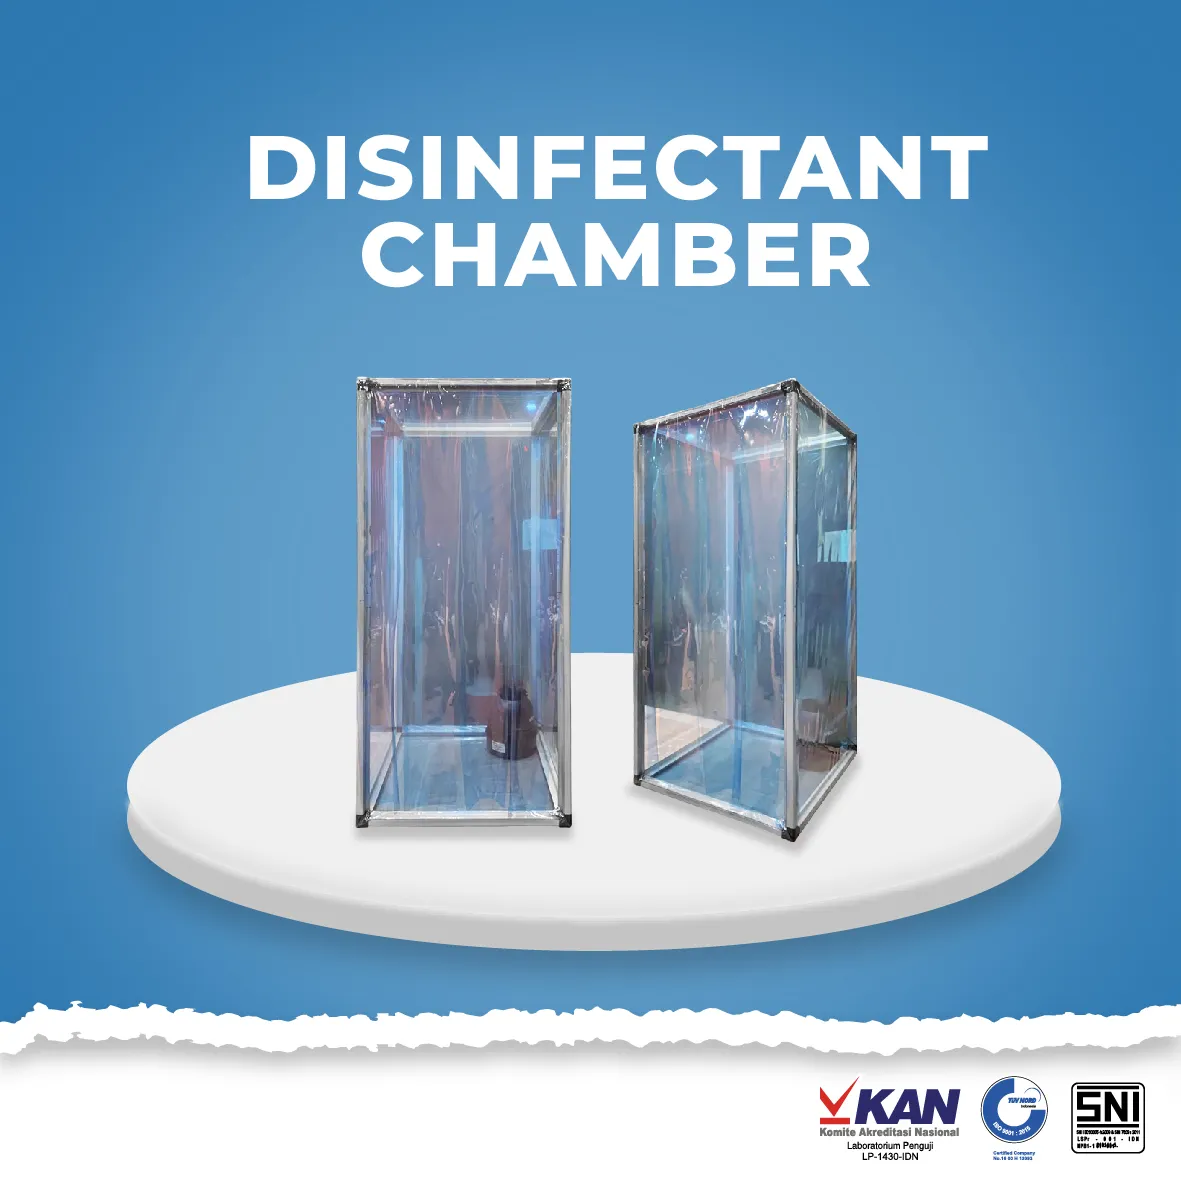  Disinfectant Chamber non fan template cover website 05